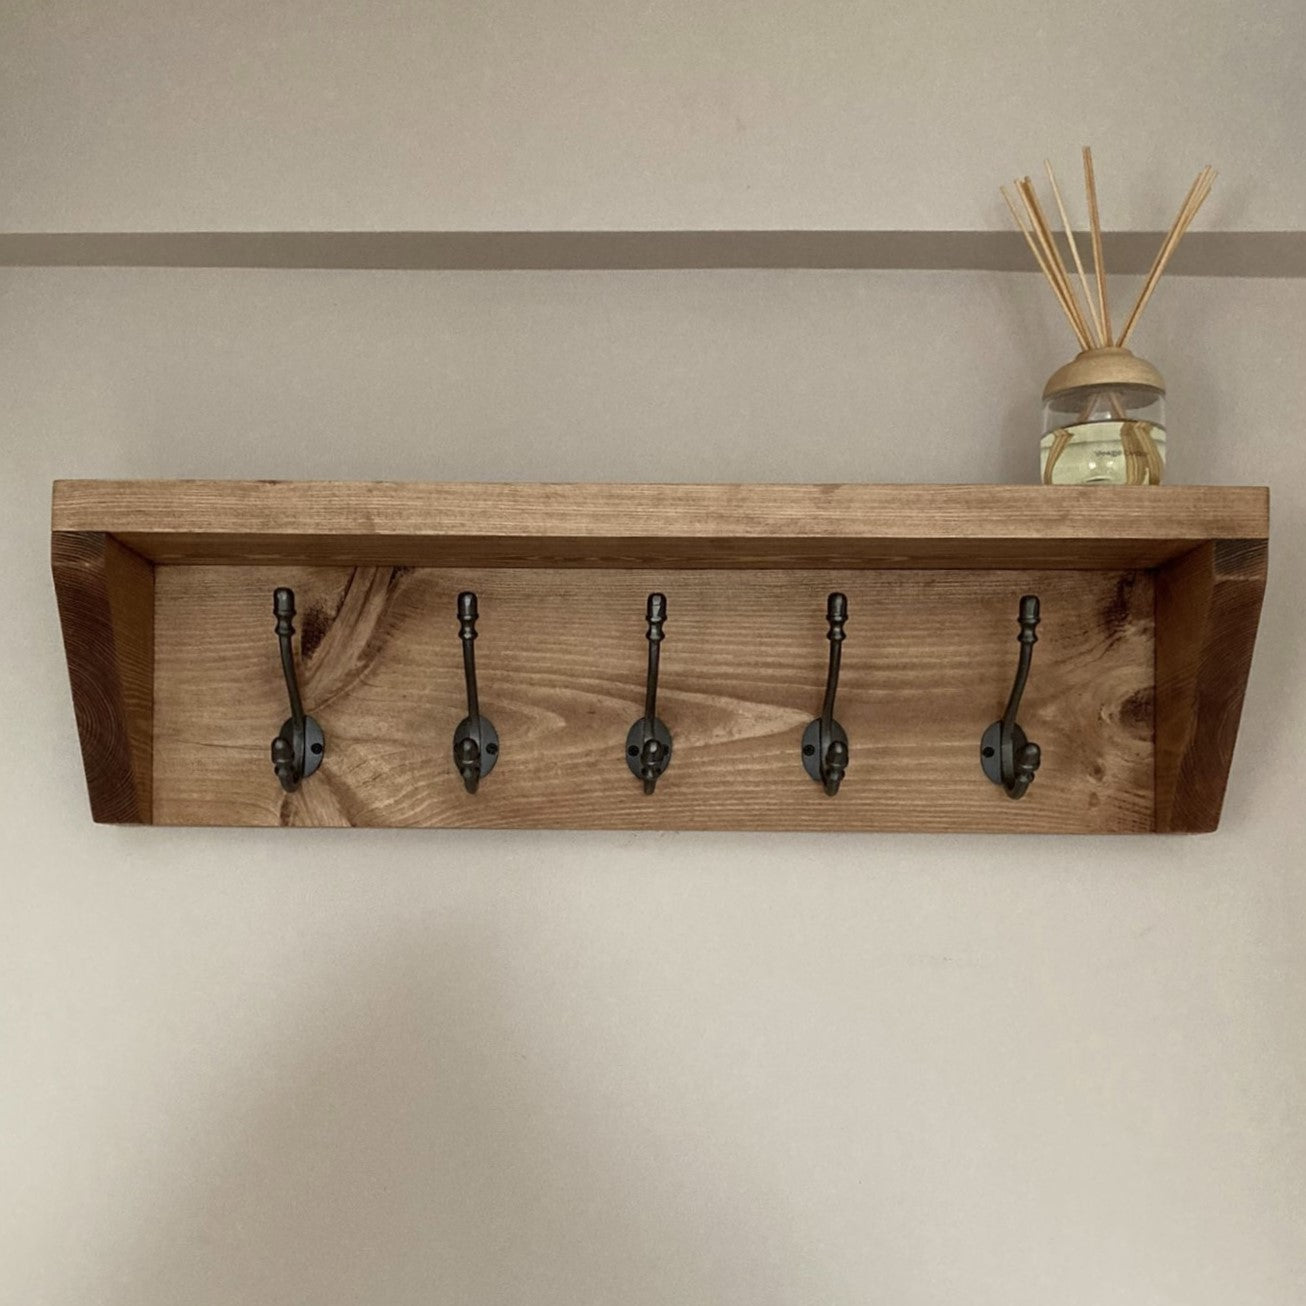 Solid Wood Rustic Industrial Style Coat Rack With Shelf